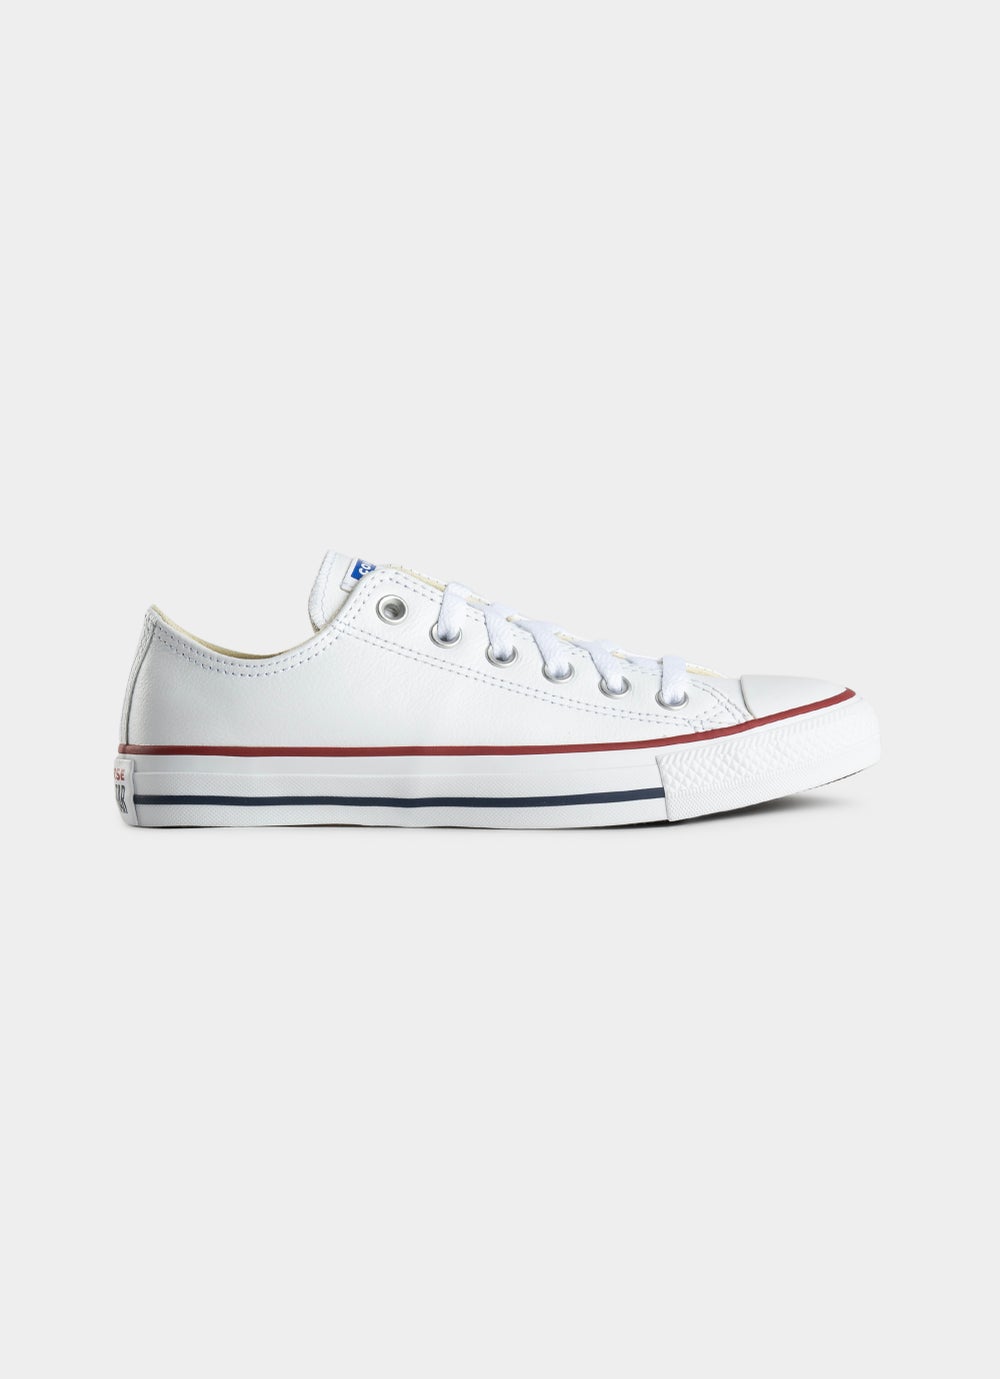 Converse Chuck All Low 'Leather' Shoe | Converse | Rat